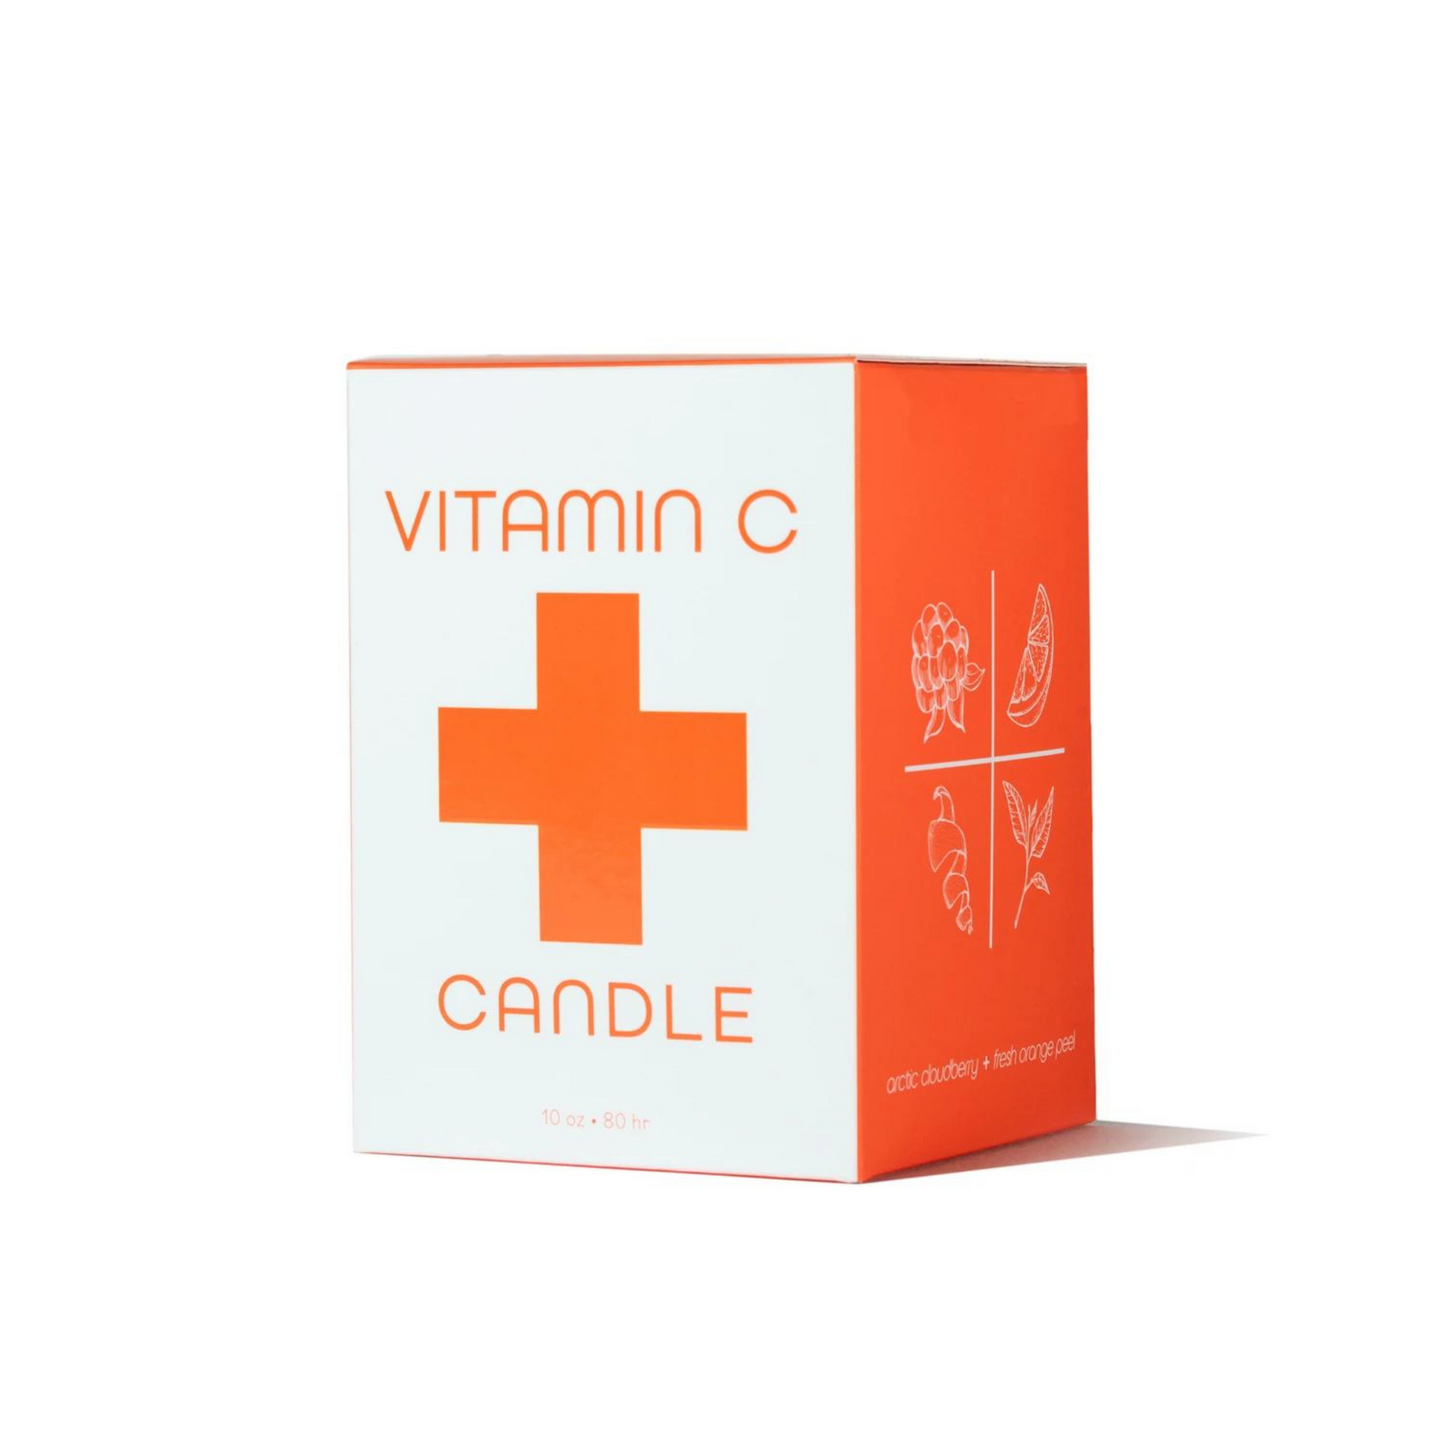 Primary Image of Vitamin C Candle